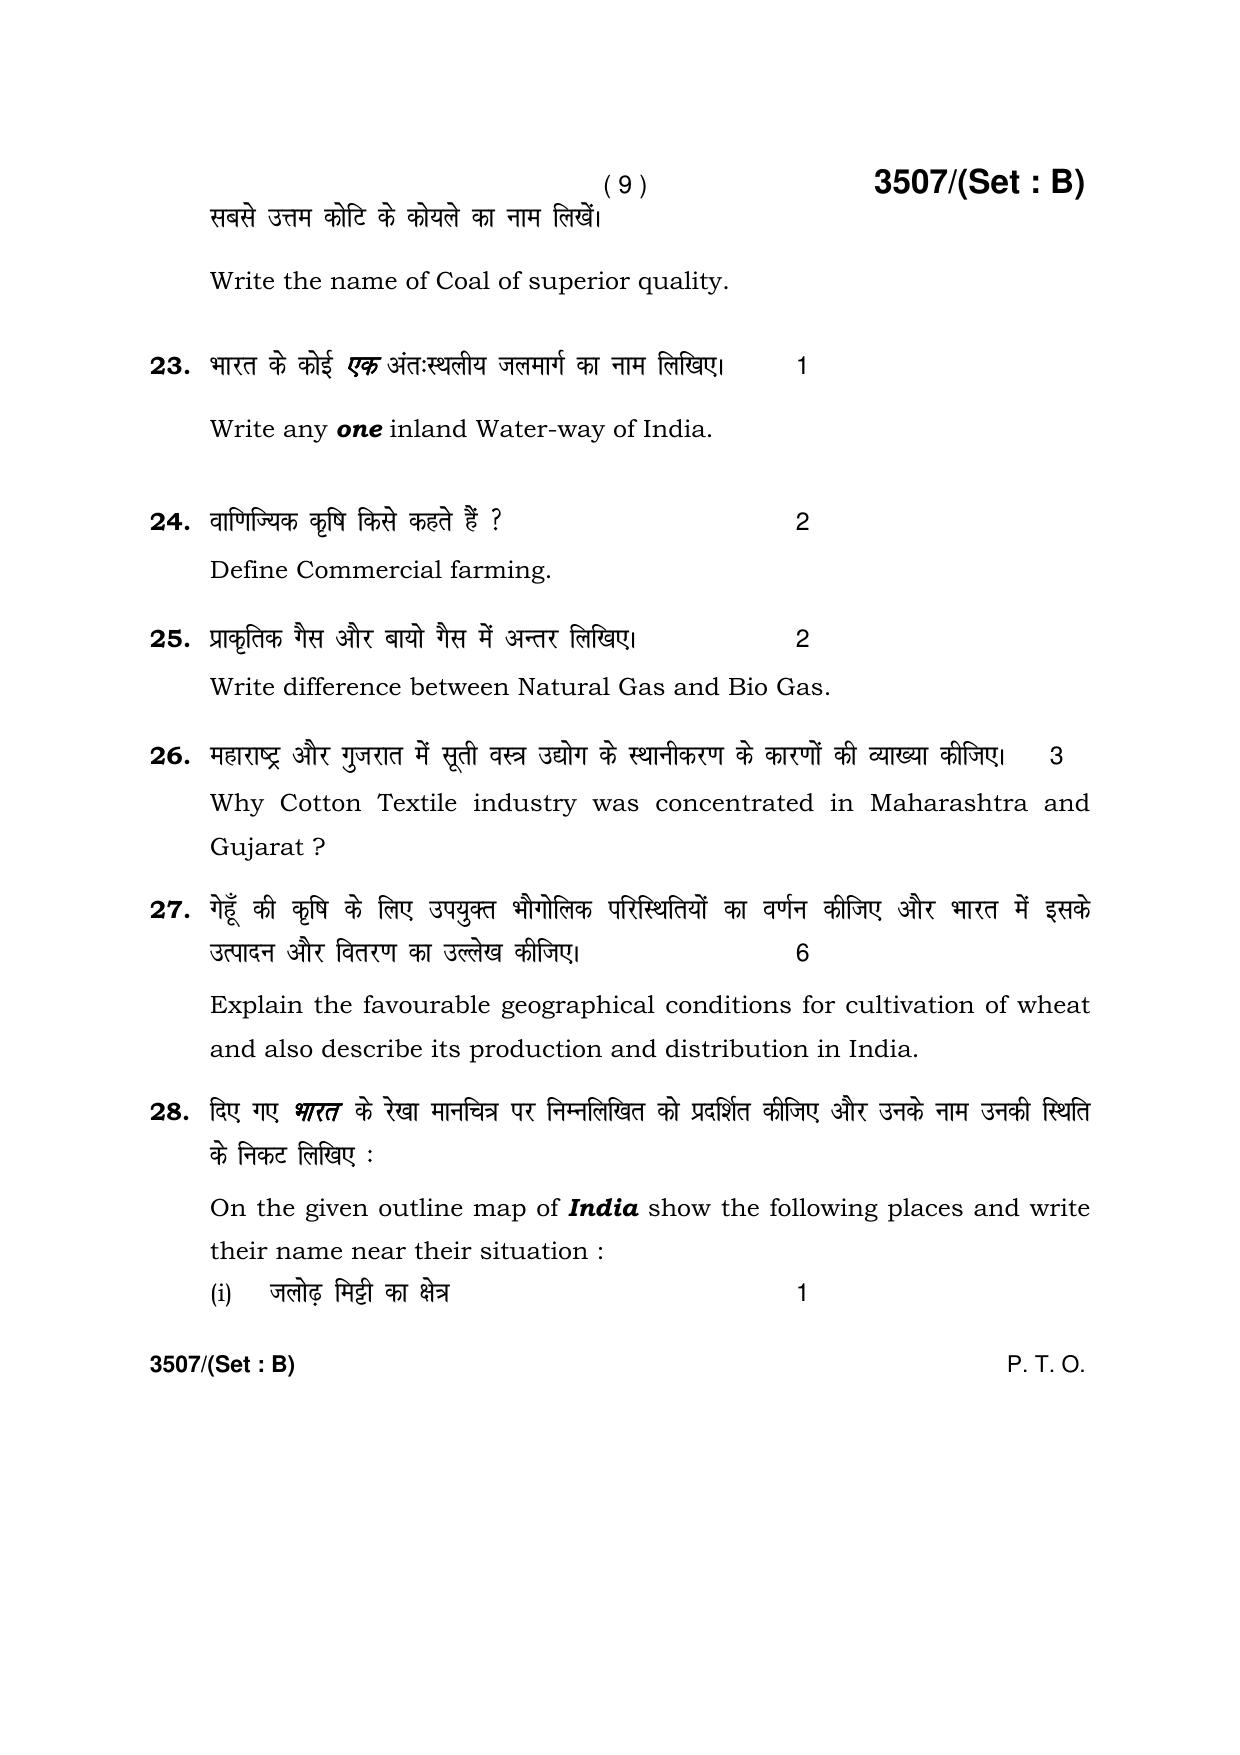 Haryana Board HBSE Class 10 Social Science -B 2018 Question Paper - Page 9